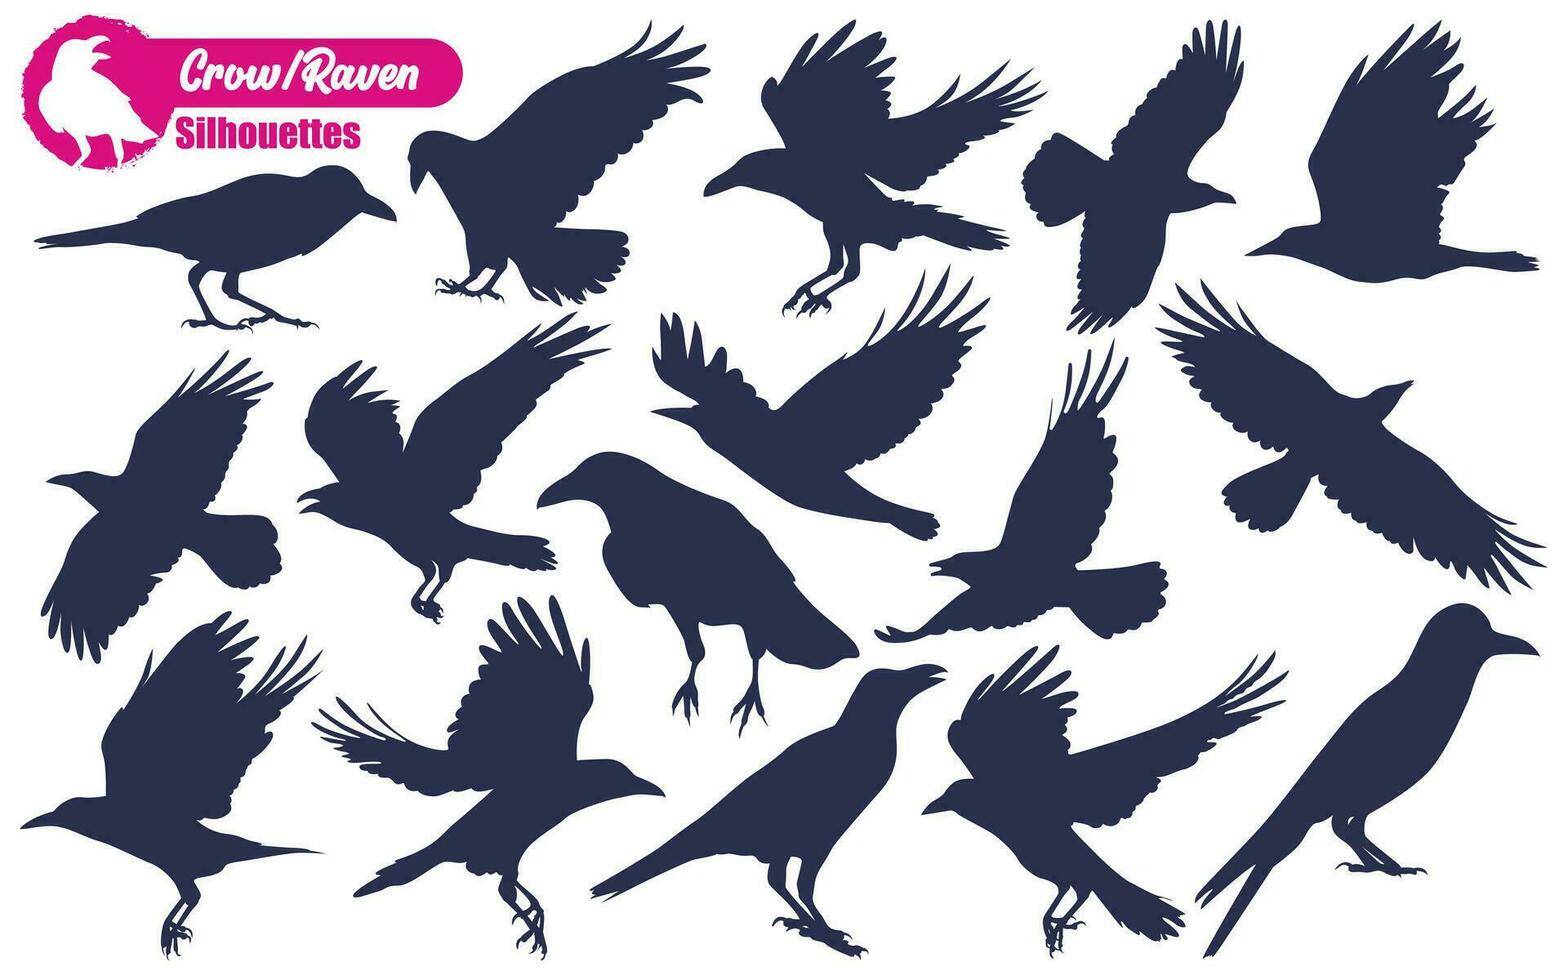 Flying Crow or Raven Silhouettes vector